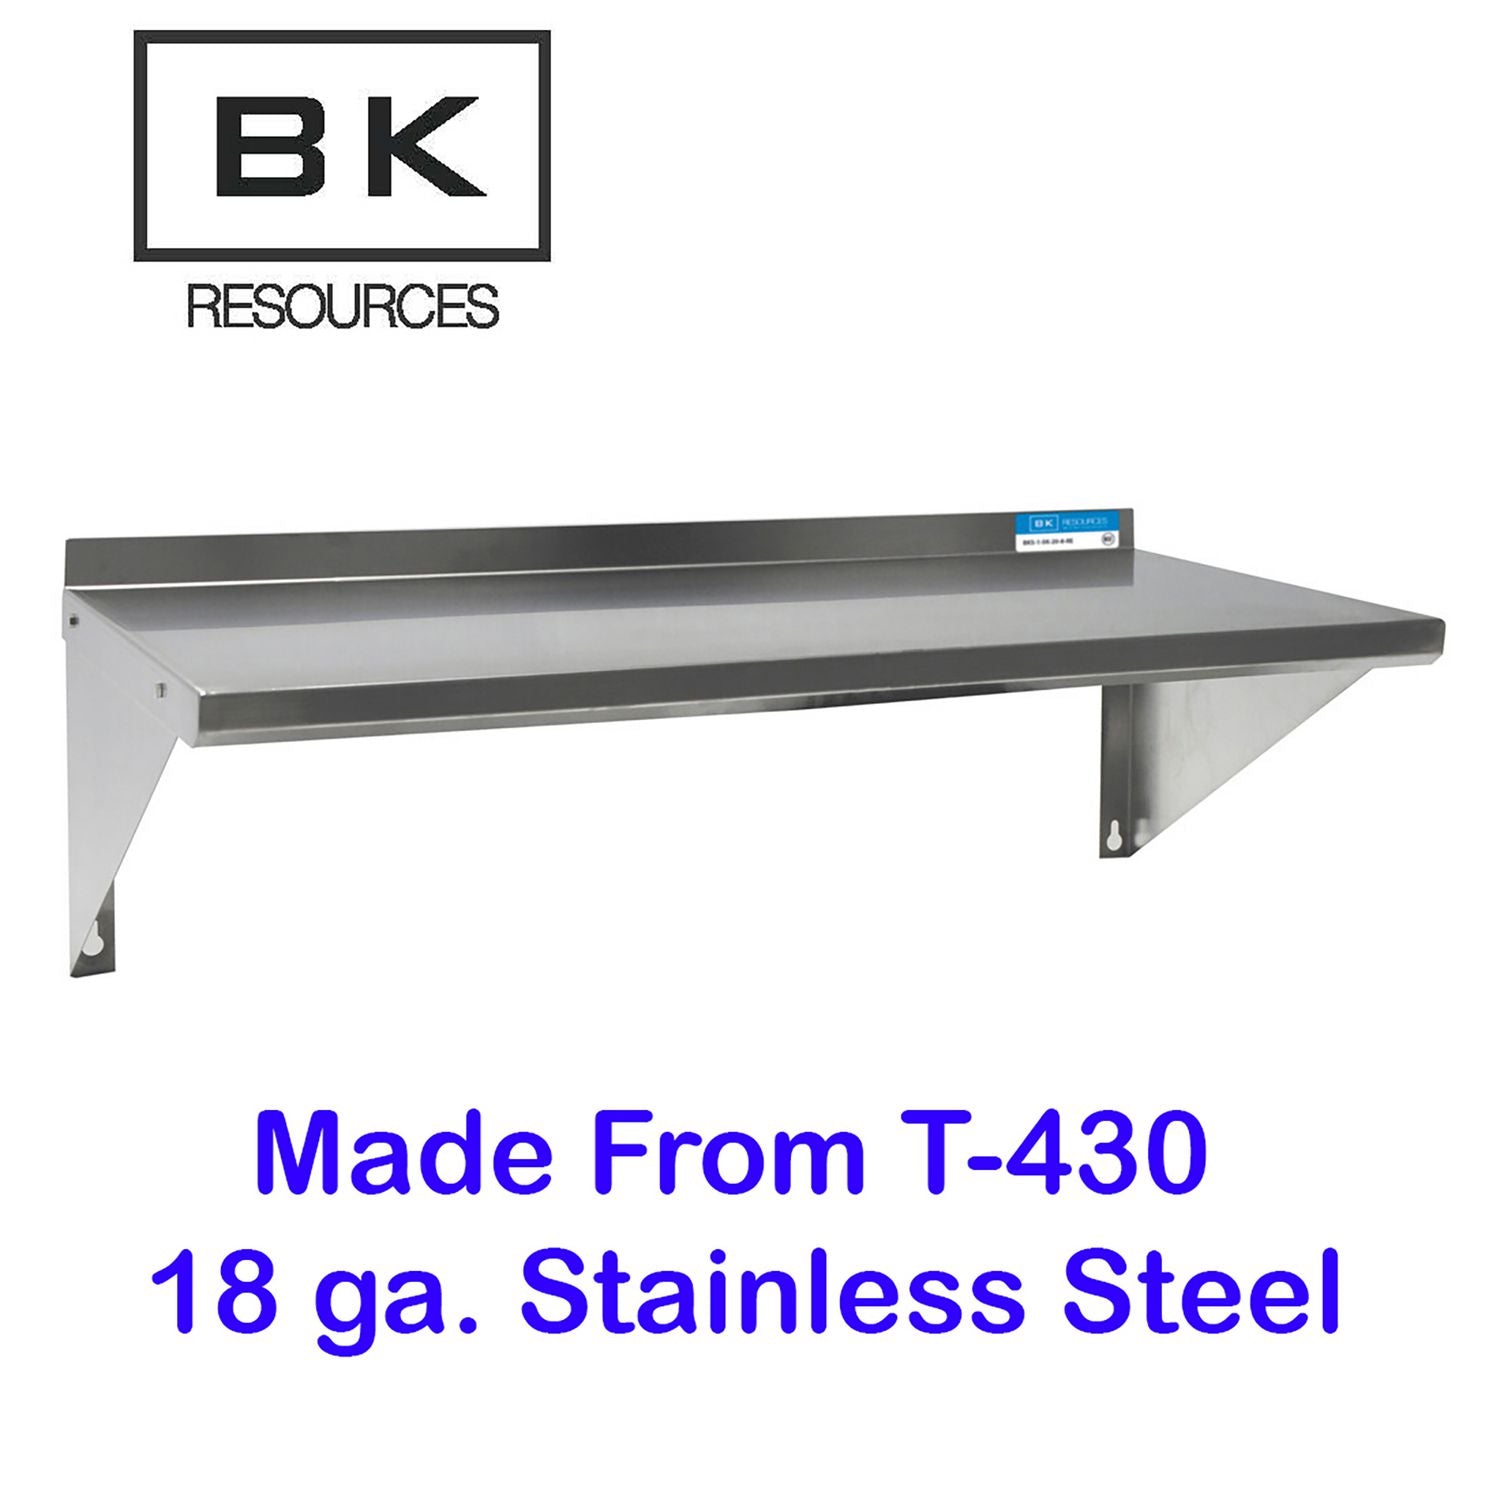 stainless-steel-economy-overshelf-36w-x-12d-x-8h-stainless-steel-silver-2-pallet-ships-in-4-6-business-days_bke2wse1236 - 3